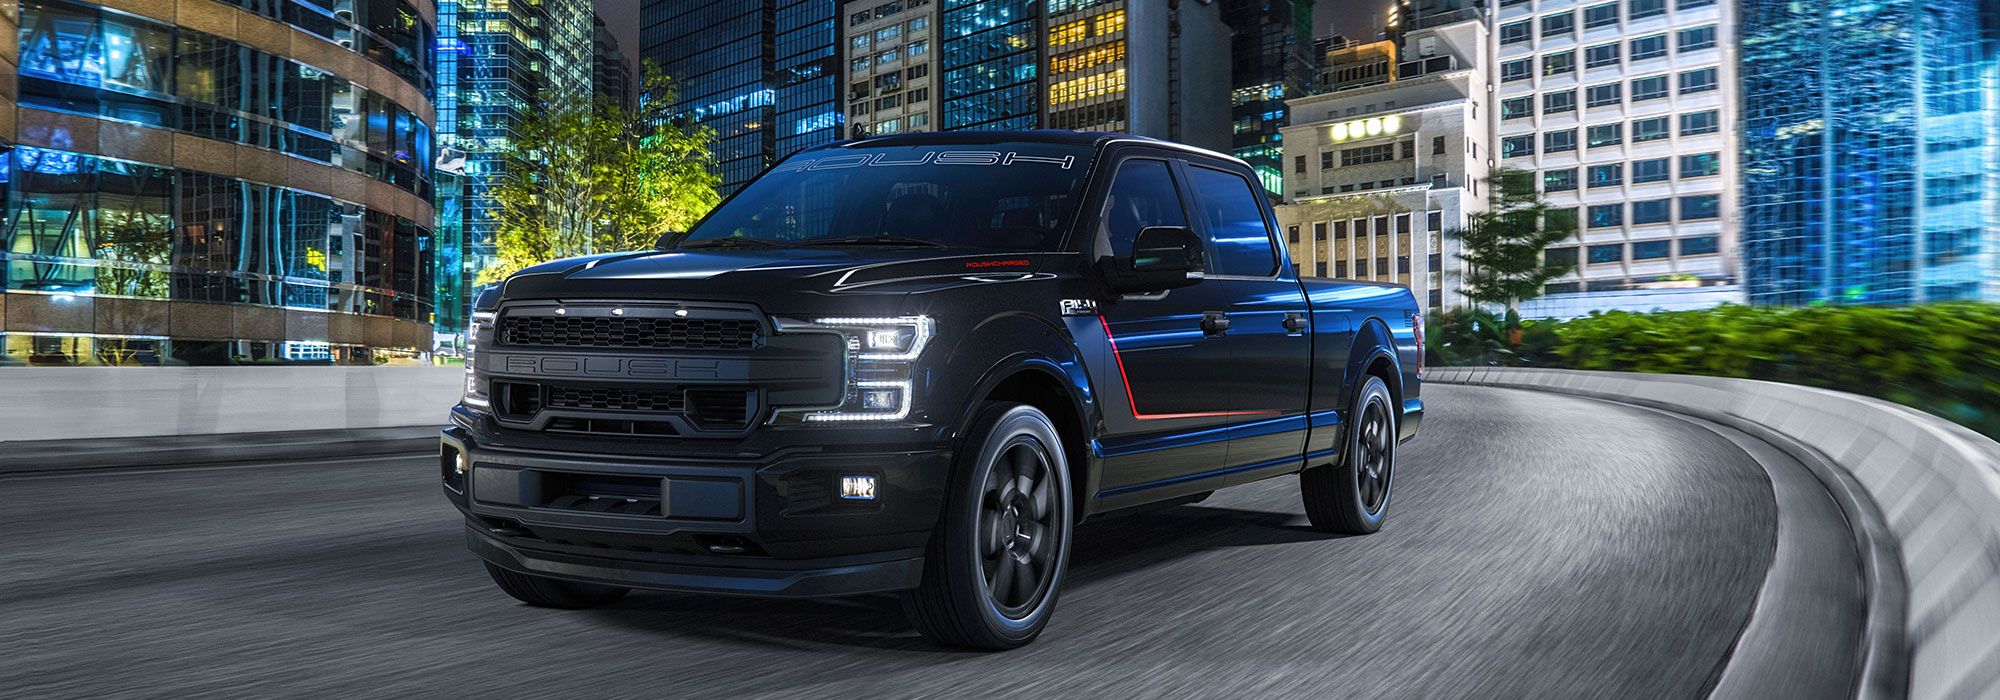 2019 Ford F-150 Nitemare by Roush Performance